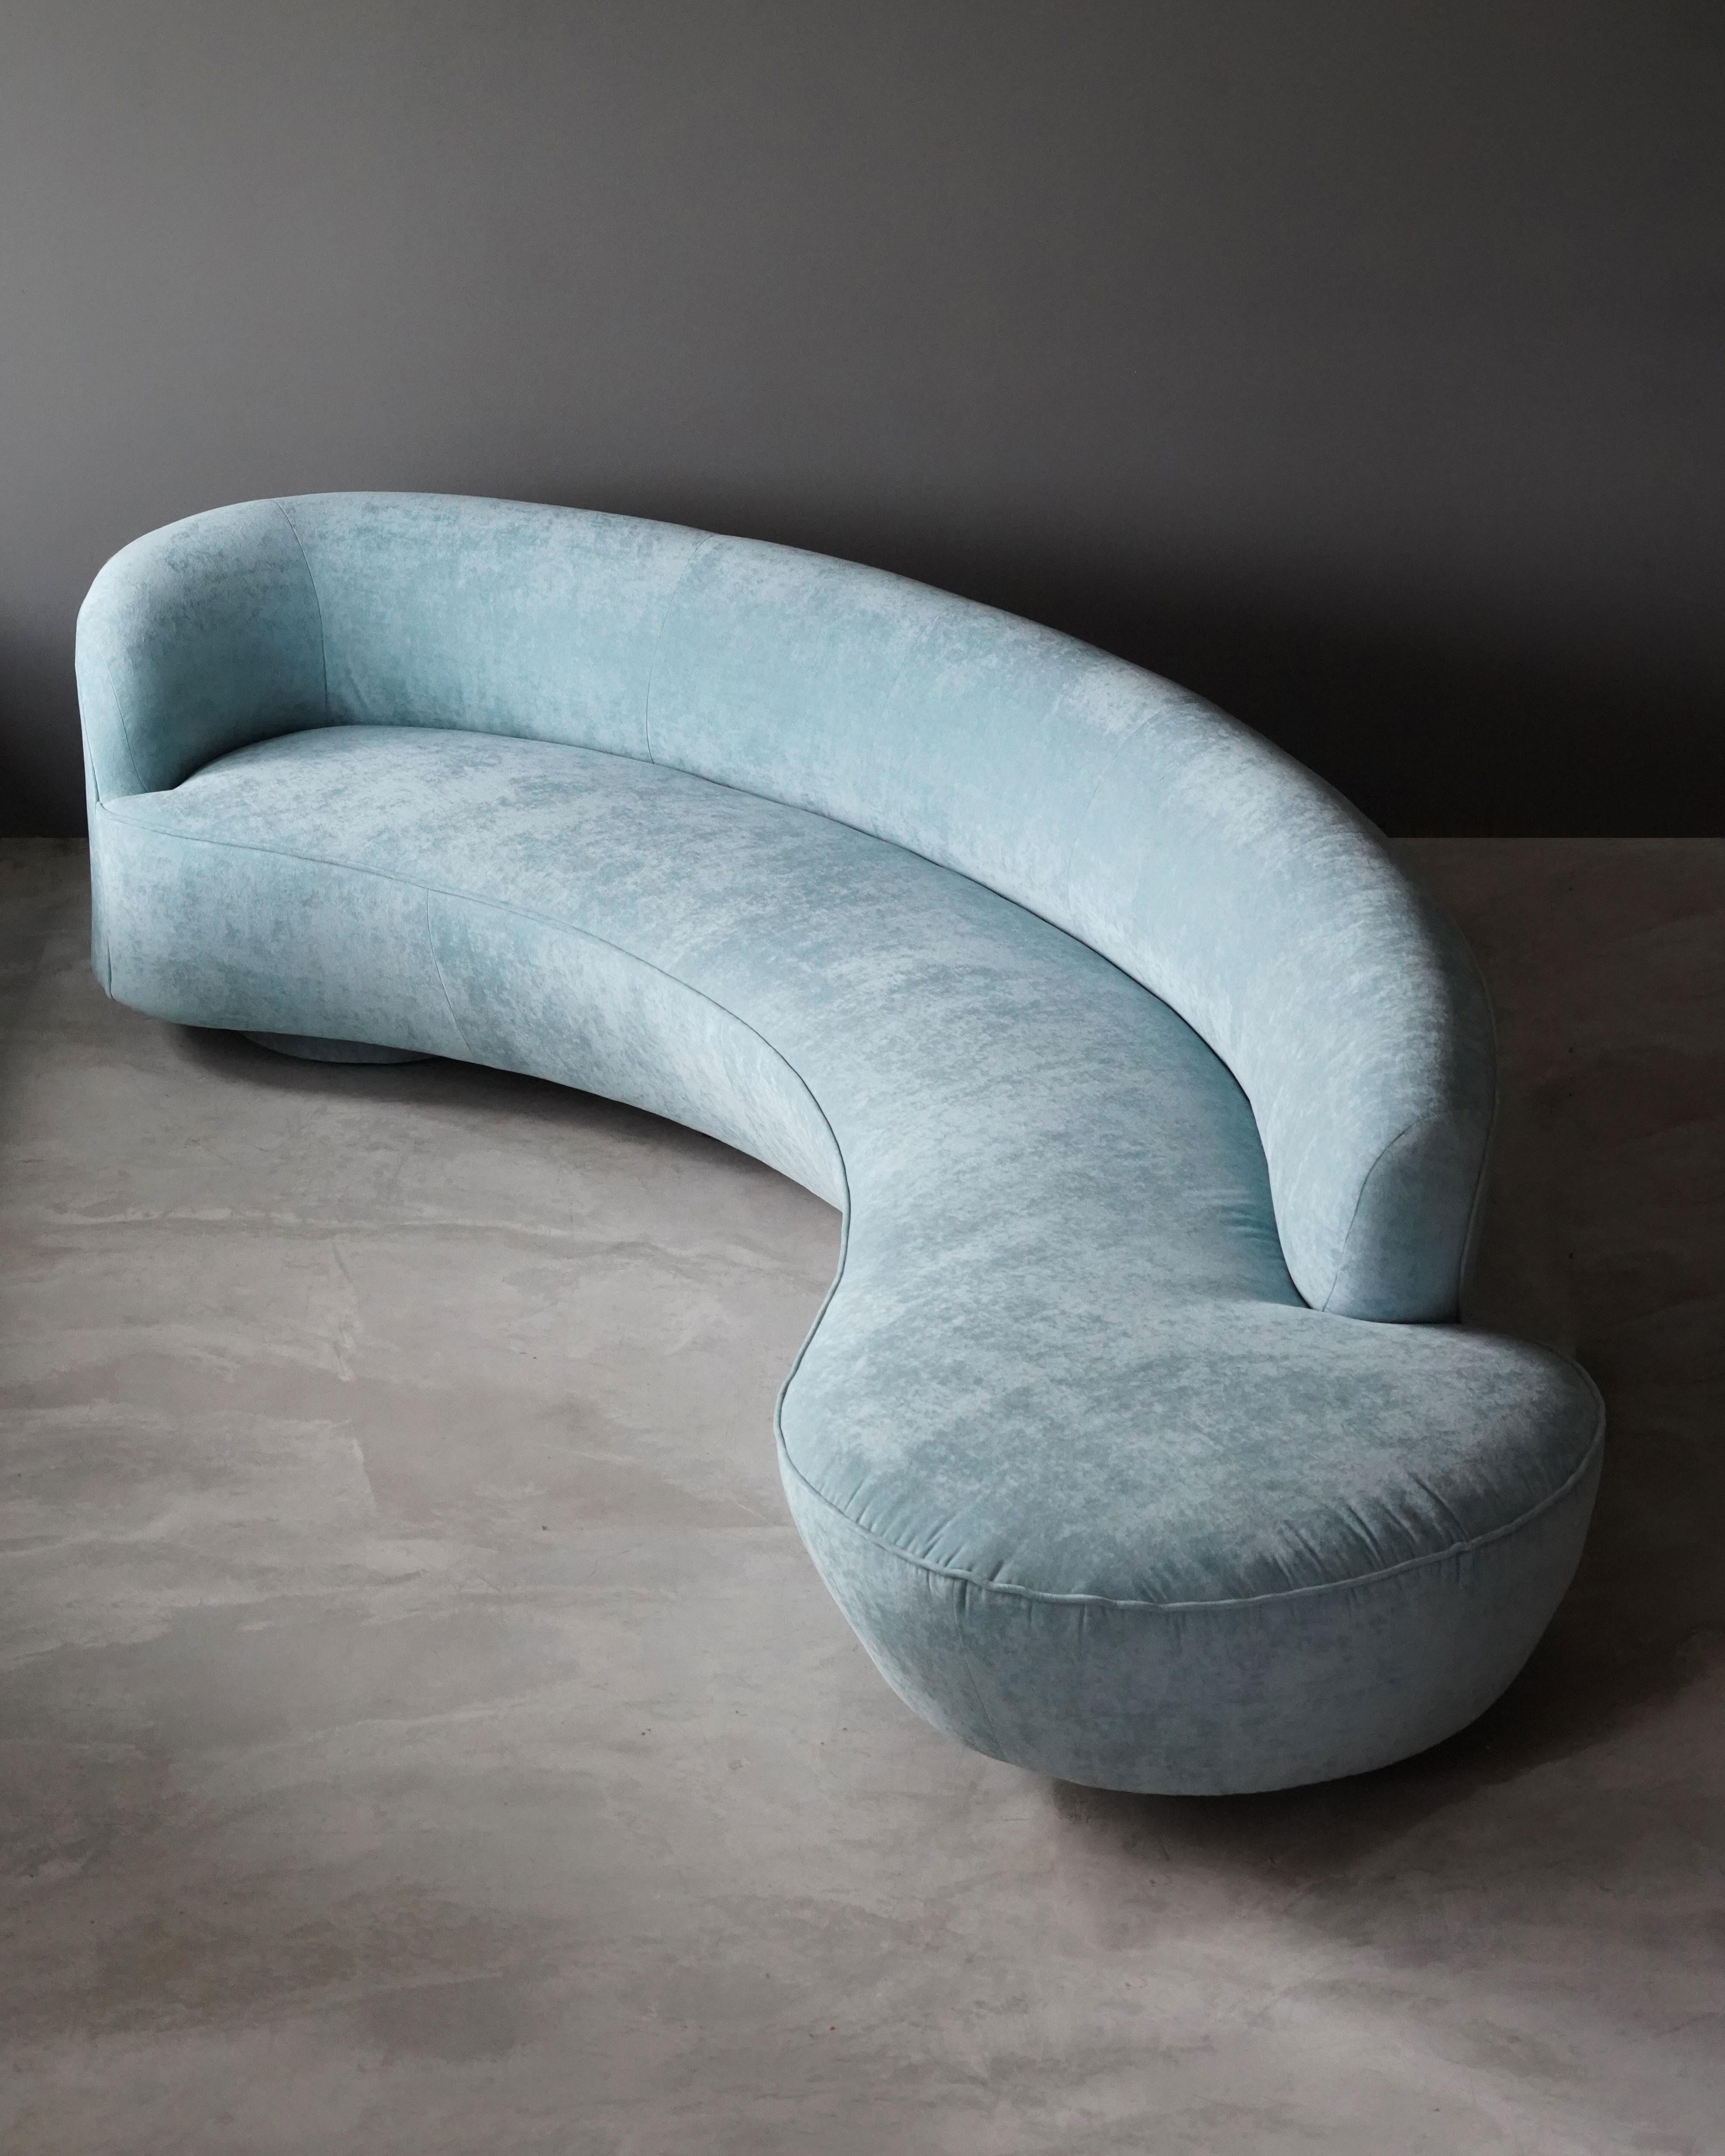 A curved serpentine sofa by Vladimir Kagan. Upholstered in grey faux-mohair fabric. Form referencing the early organic design movement. Executed by Directional.

Other designers of the period include Isamu Noguchi, George Nakashima, Gio Ponti, and